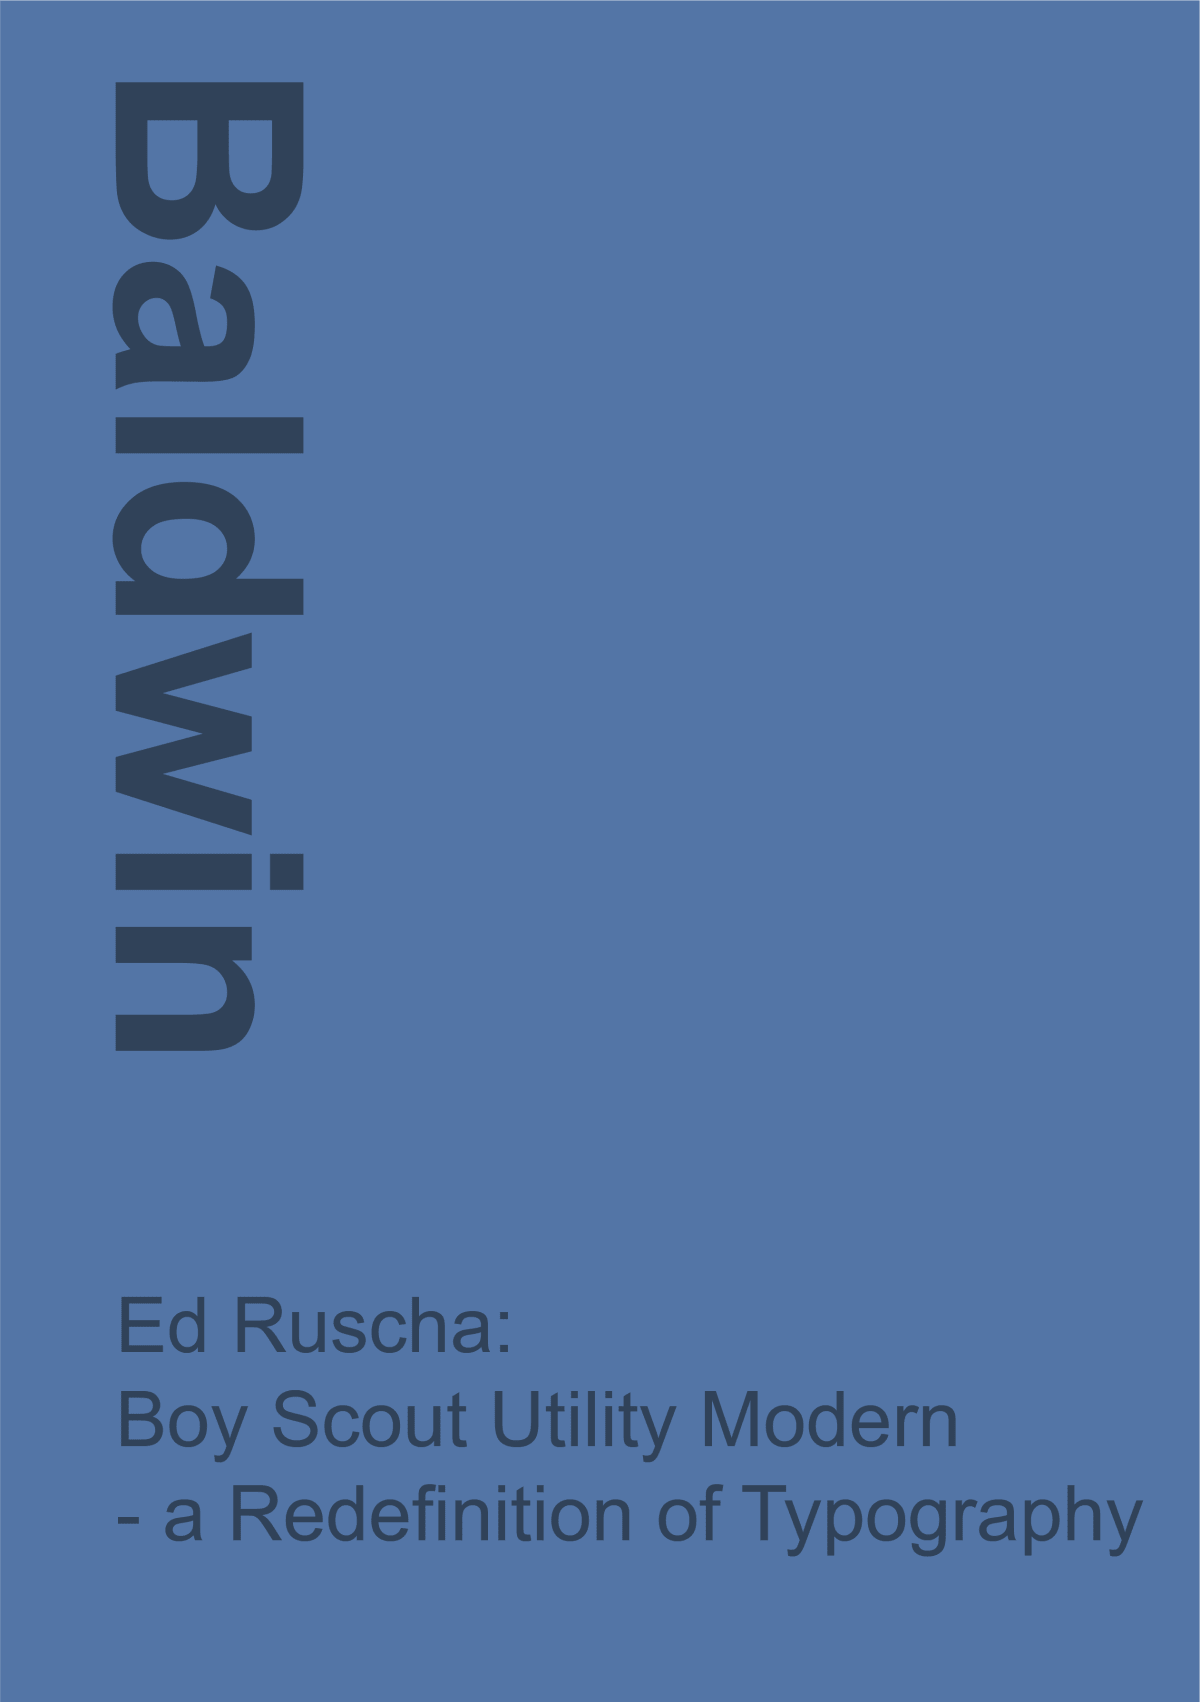 Ed Ruscha: Boy Scout Utility Modern- a redefinition of Typography